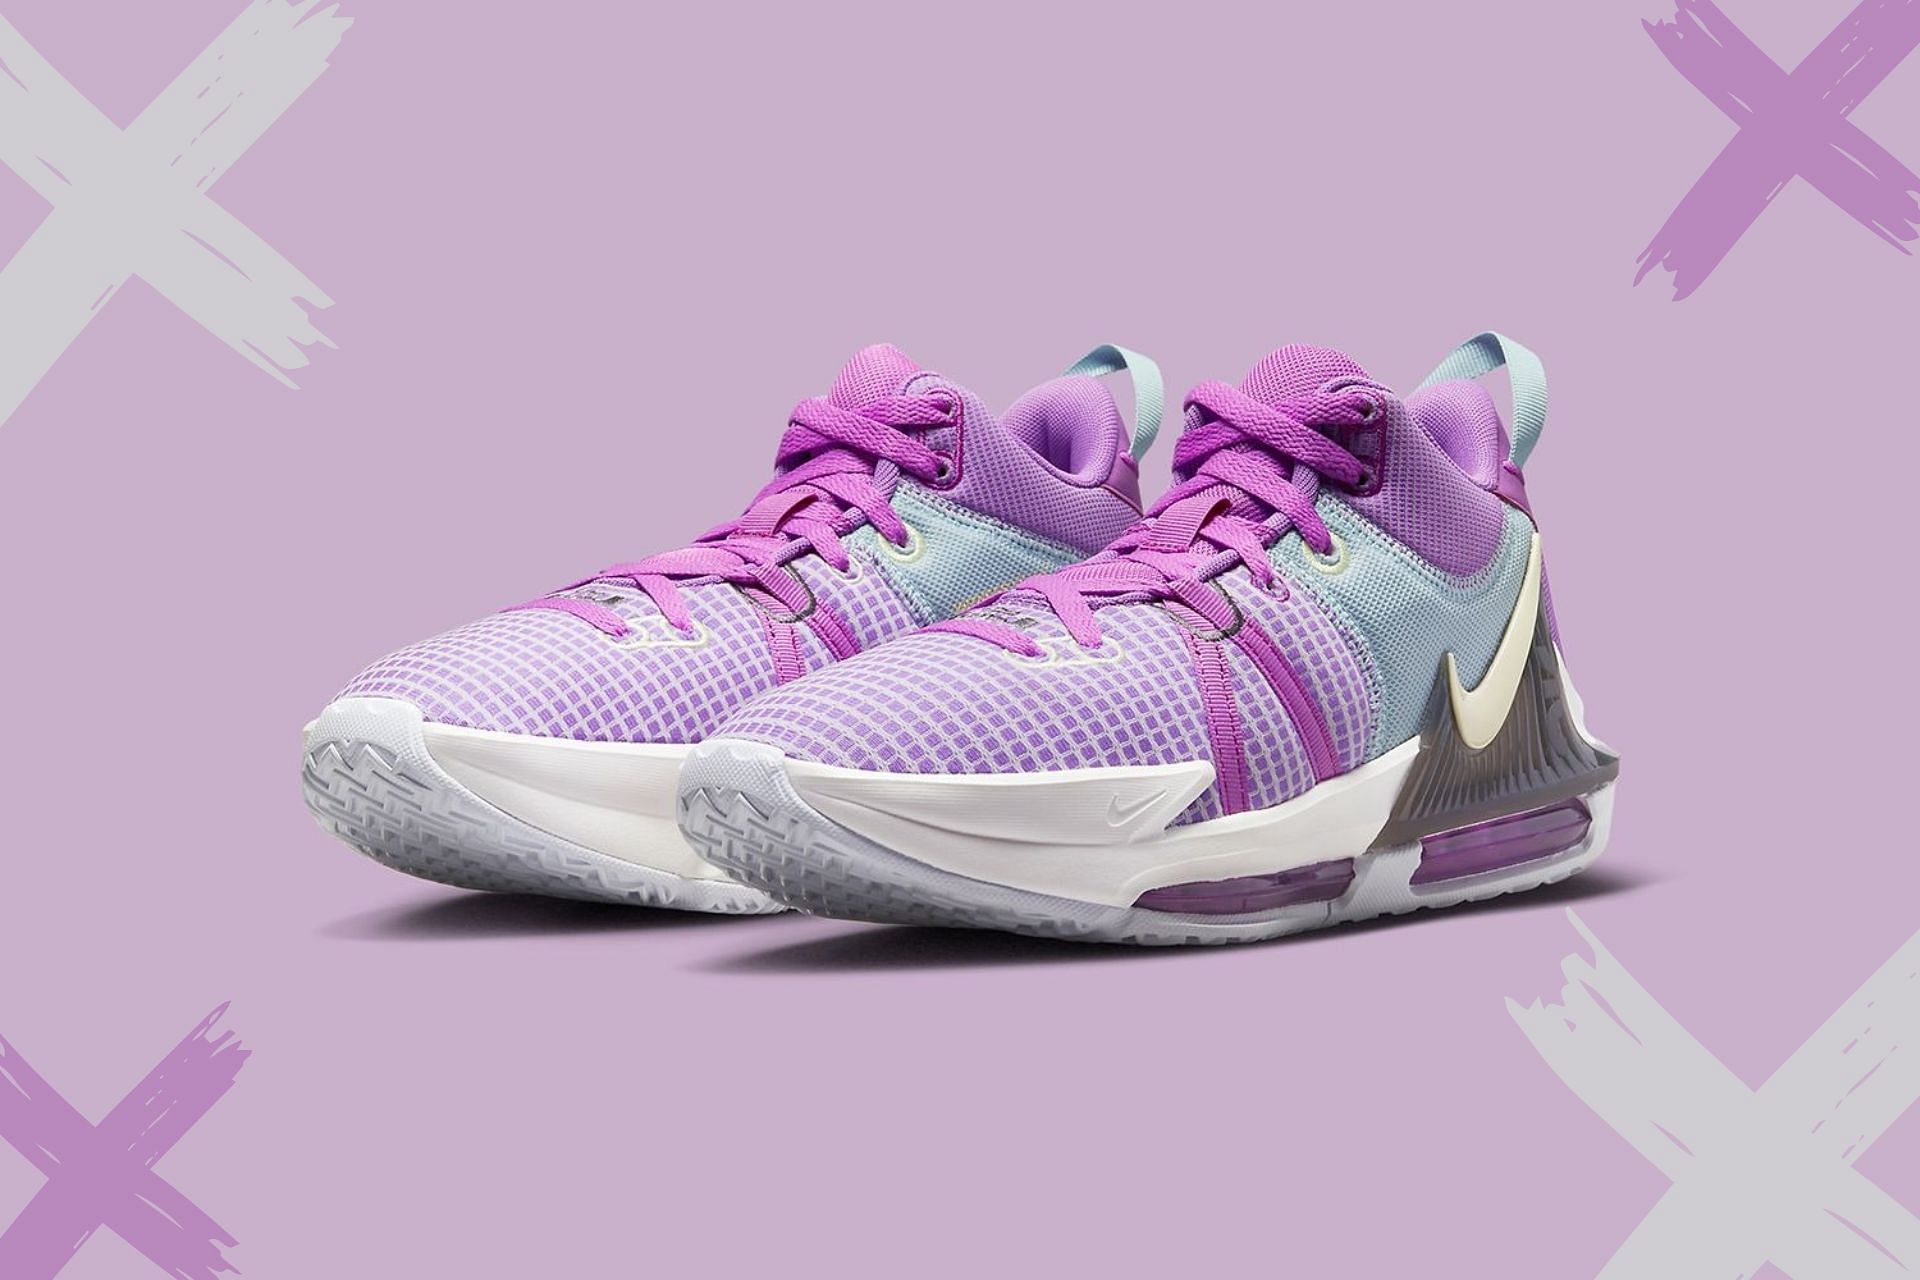 Where to buy Nike LeBron Witness 7 “Purple Pastel” shoes? Price